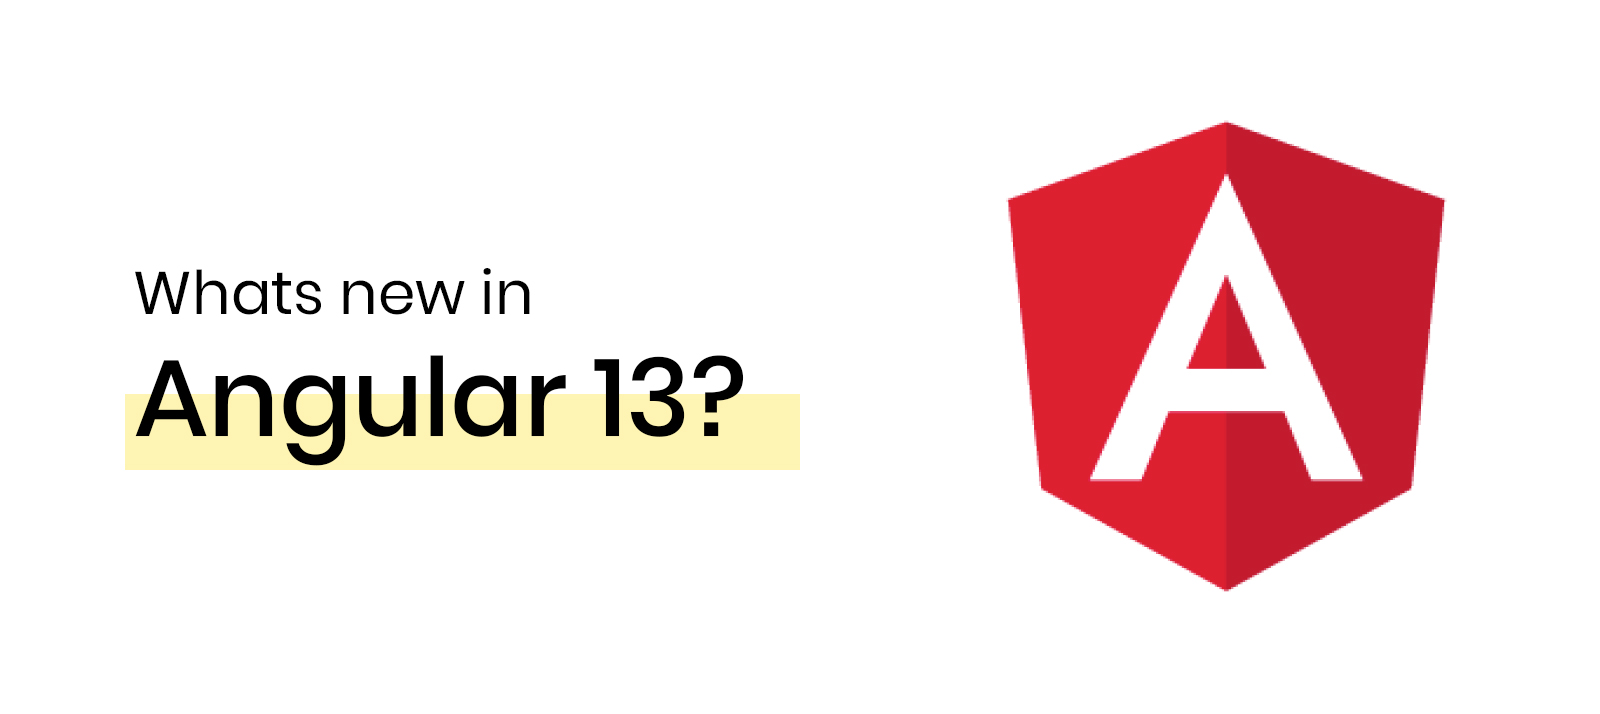  What’s New in Angular 13? New Features and Changes in Angular 13